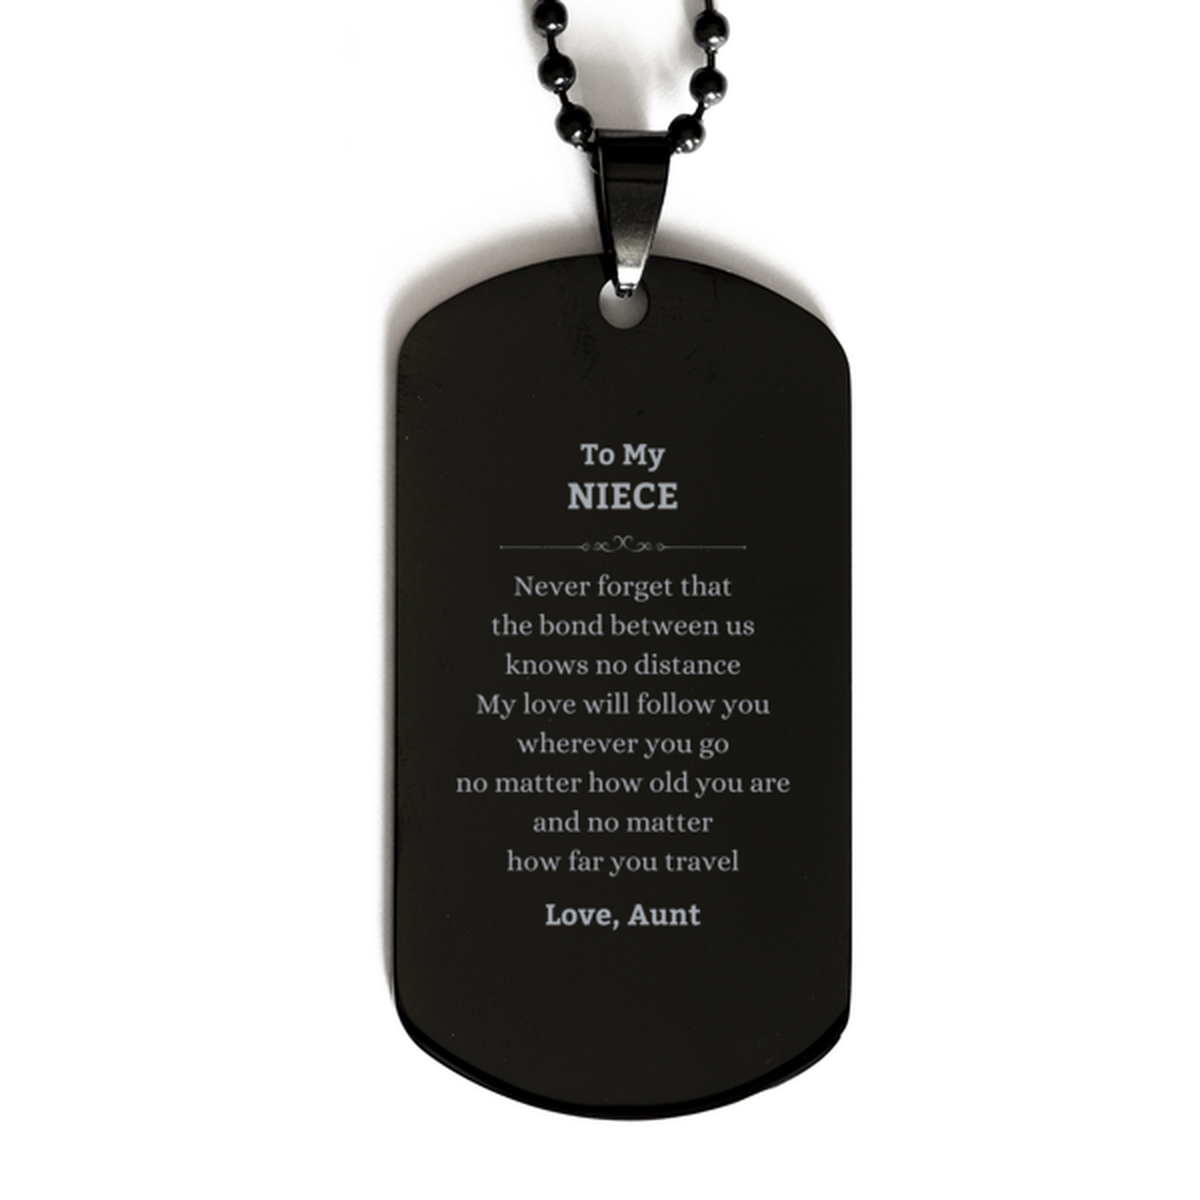 Niece Birthday Gifts from Aunt, Adjustable Black Dog Tag for Niece Christmas Graduation Unique Gifts Niece Never forget that the bond between us knows no distance. Love, Aunt